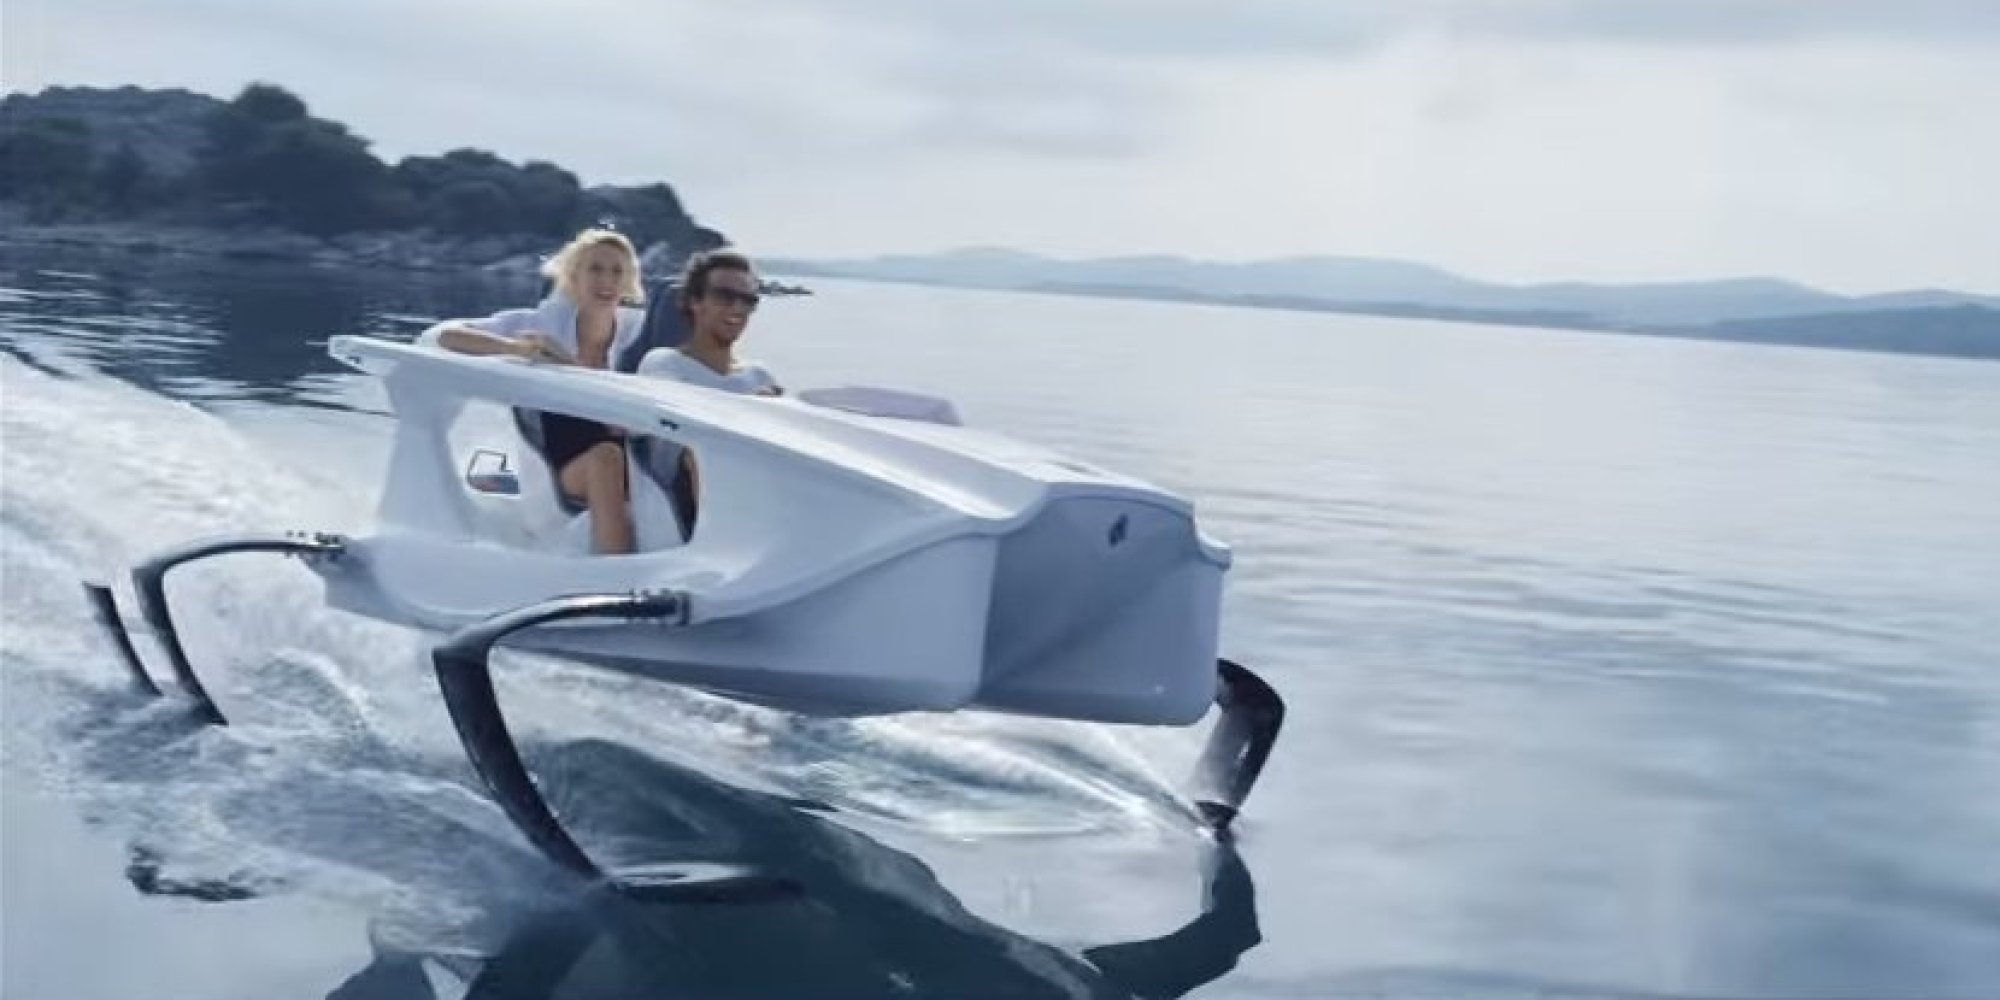 The Quadrofoil Hopes To Be The Boat Of The Future | HuffPost